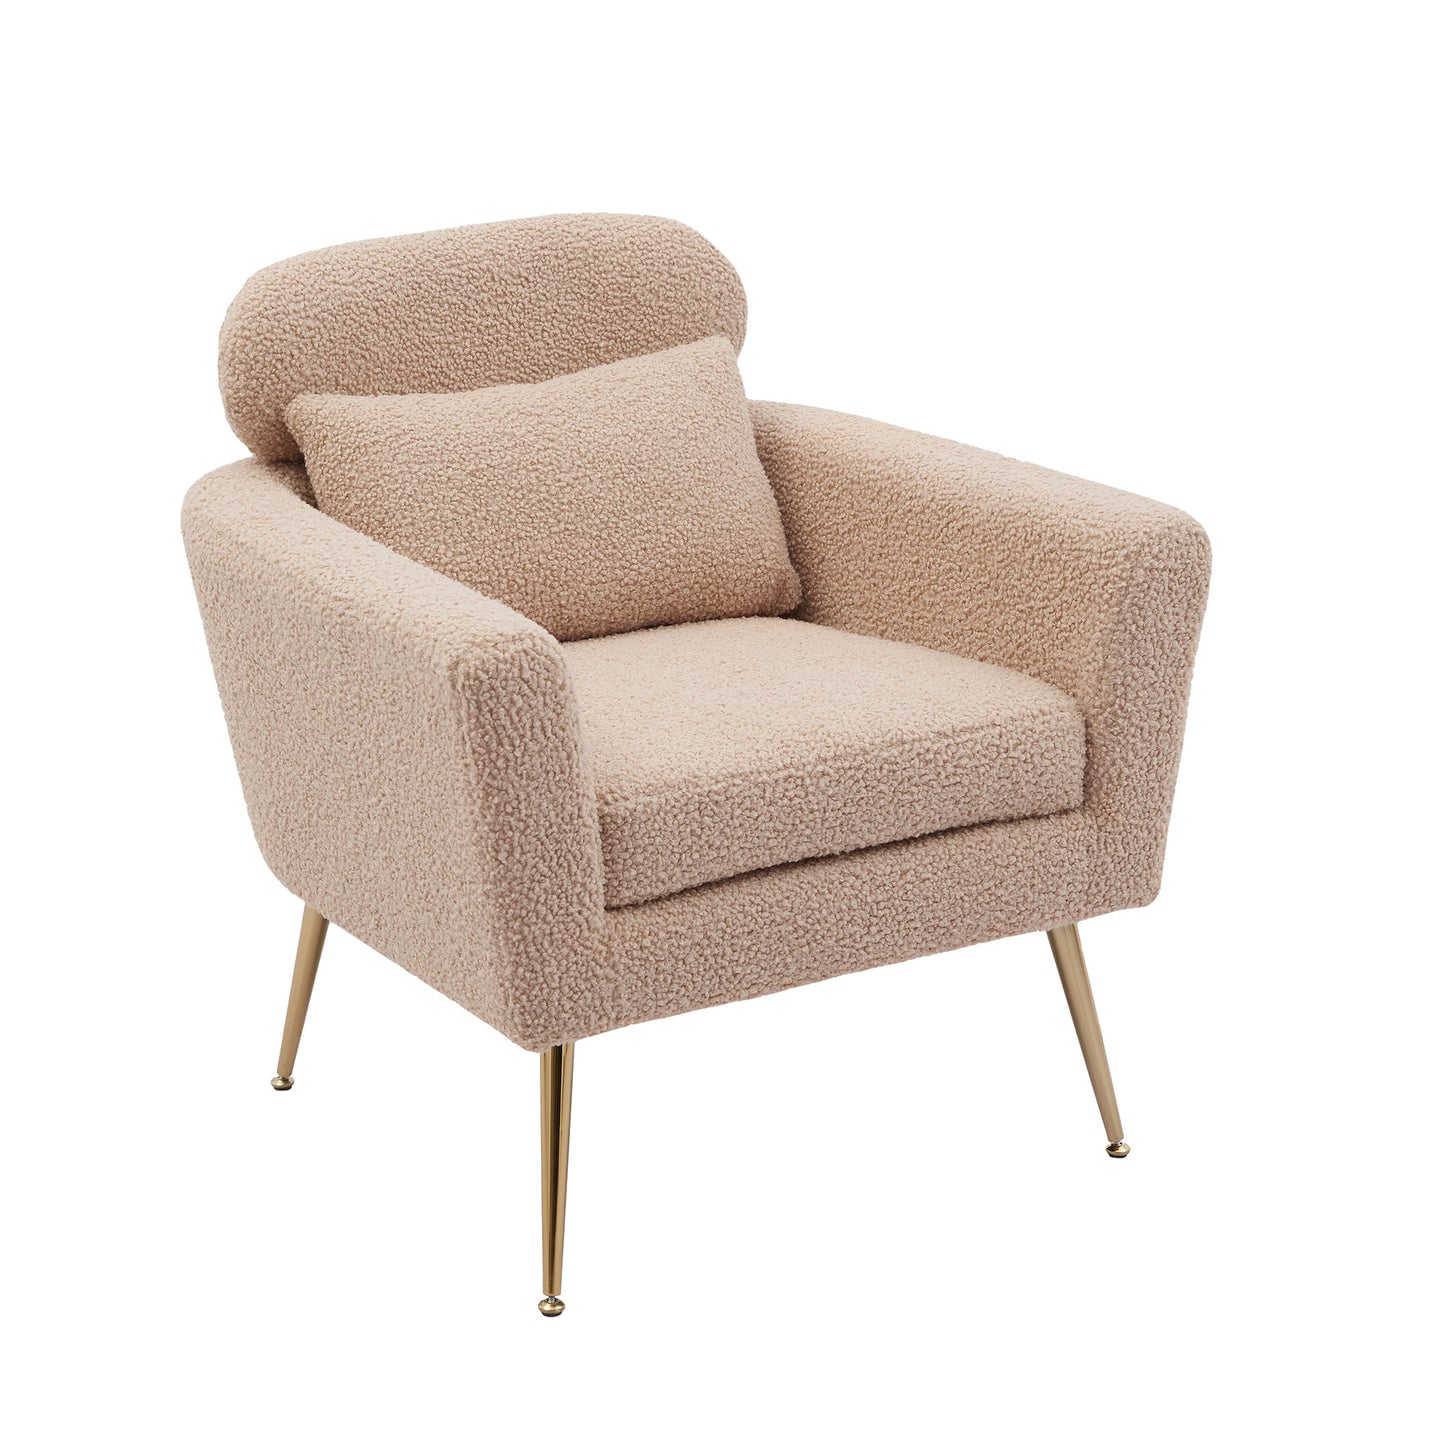 29.5"W Modern Boucle Accent Chair Armchair Upholstered Reading Chair Single Sofa Leisure Club Chair with Gold Metal Leg and Throw Pillow for Living Room Bedroom Dorm Room Office, Light Camel Boucle